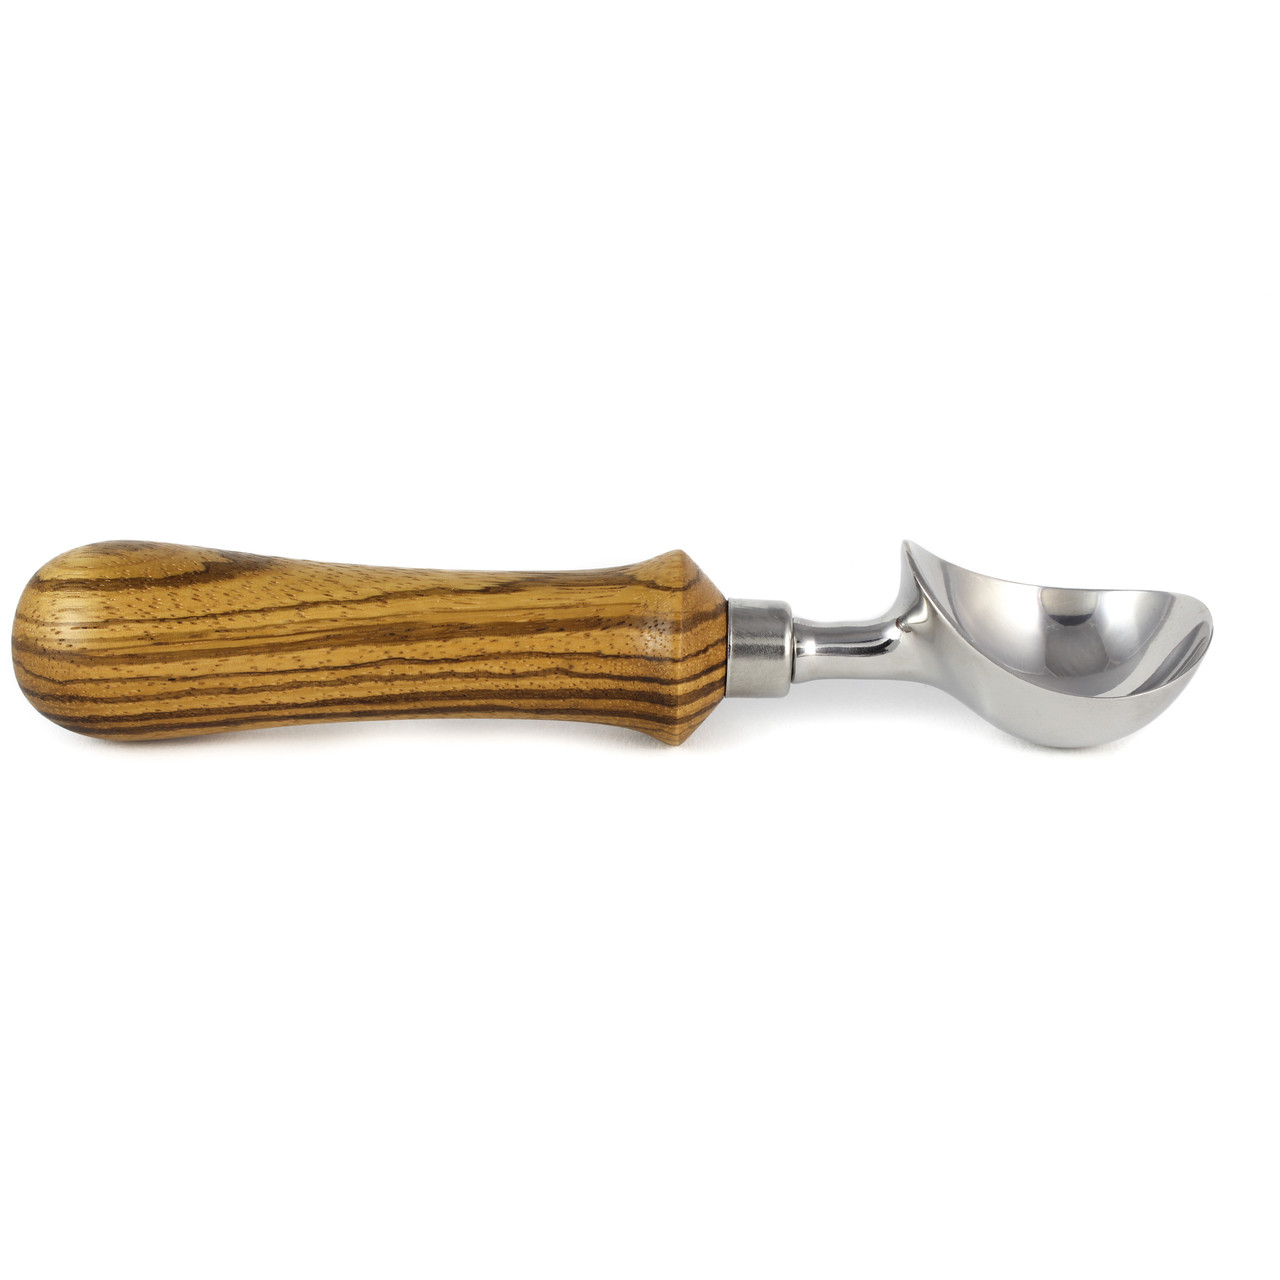 4 Wooden Grain Stainless Steel Ice Cream Scoop Tools for Cupcakes